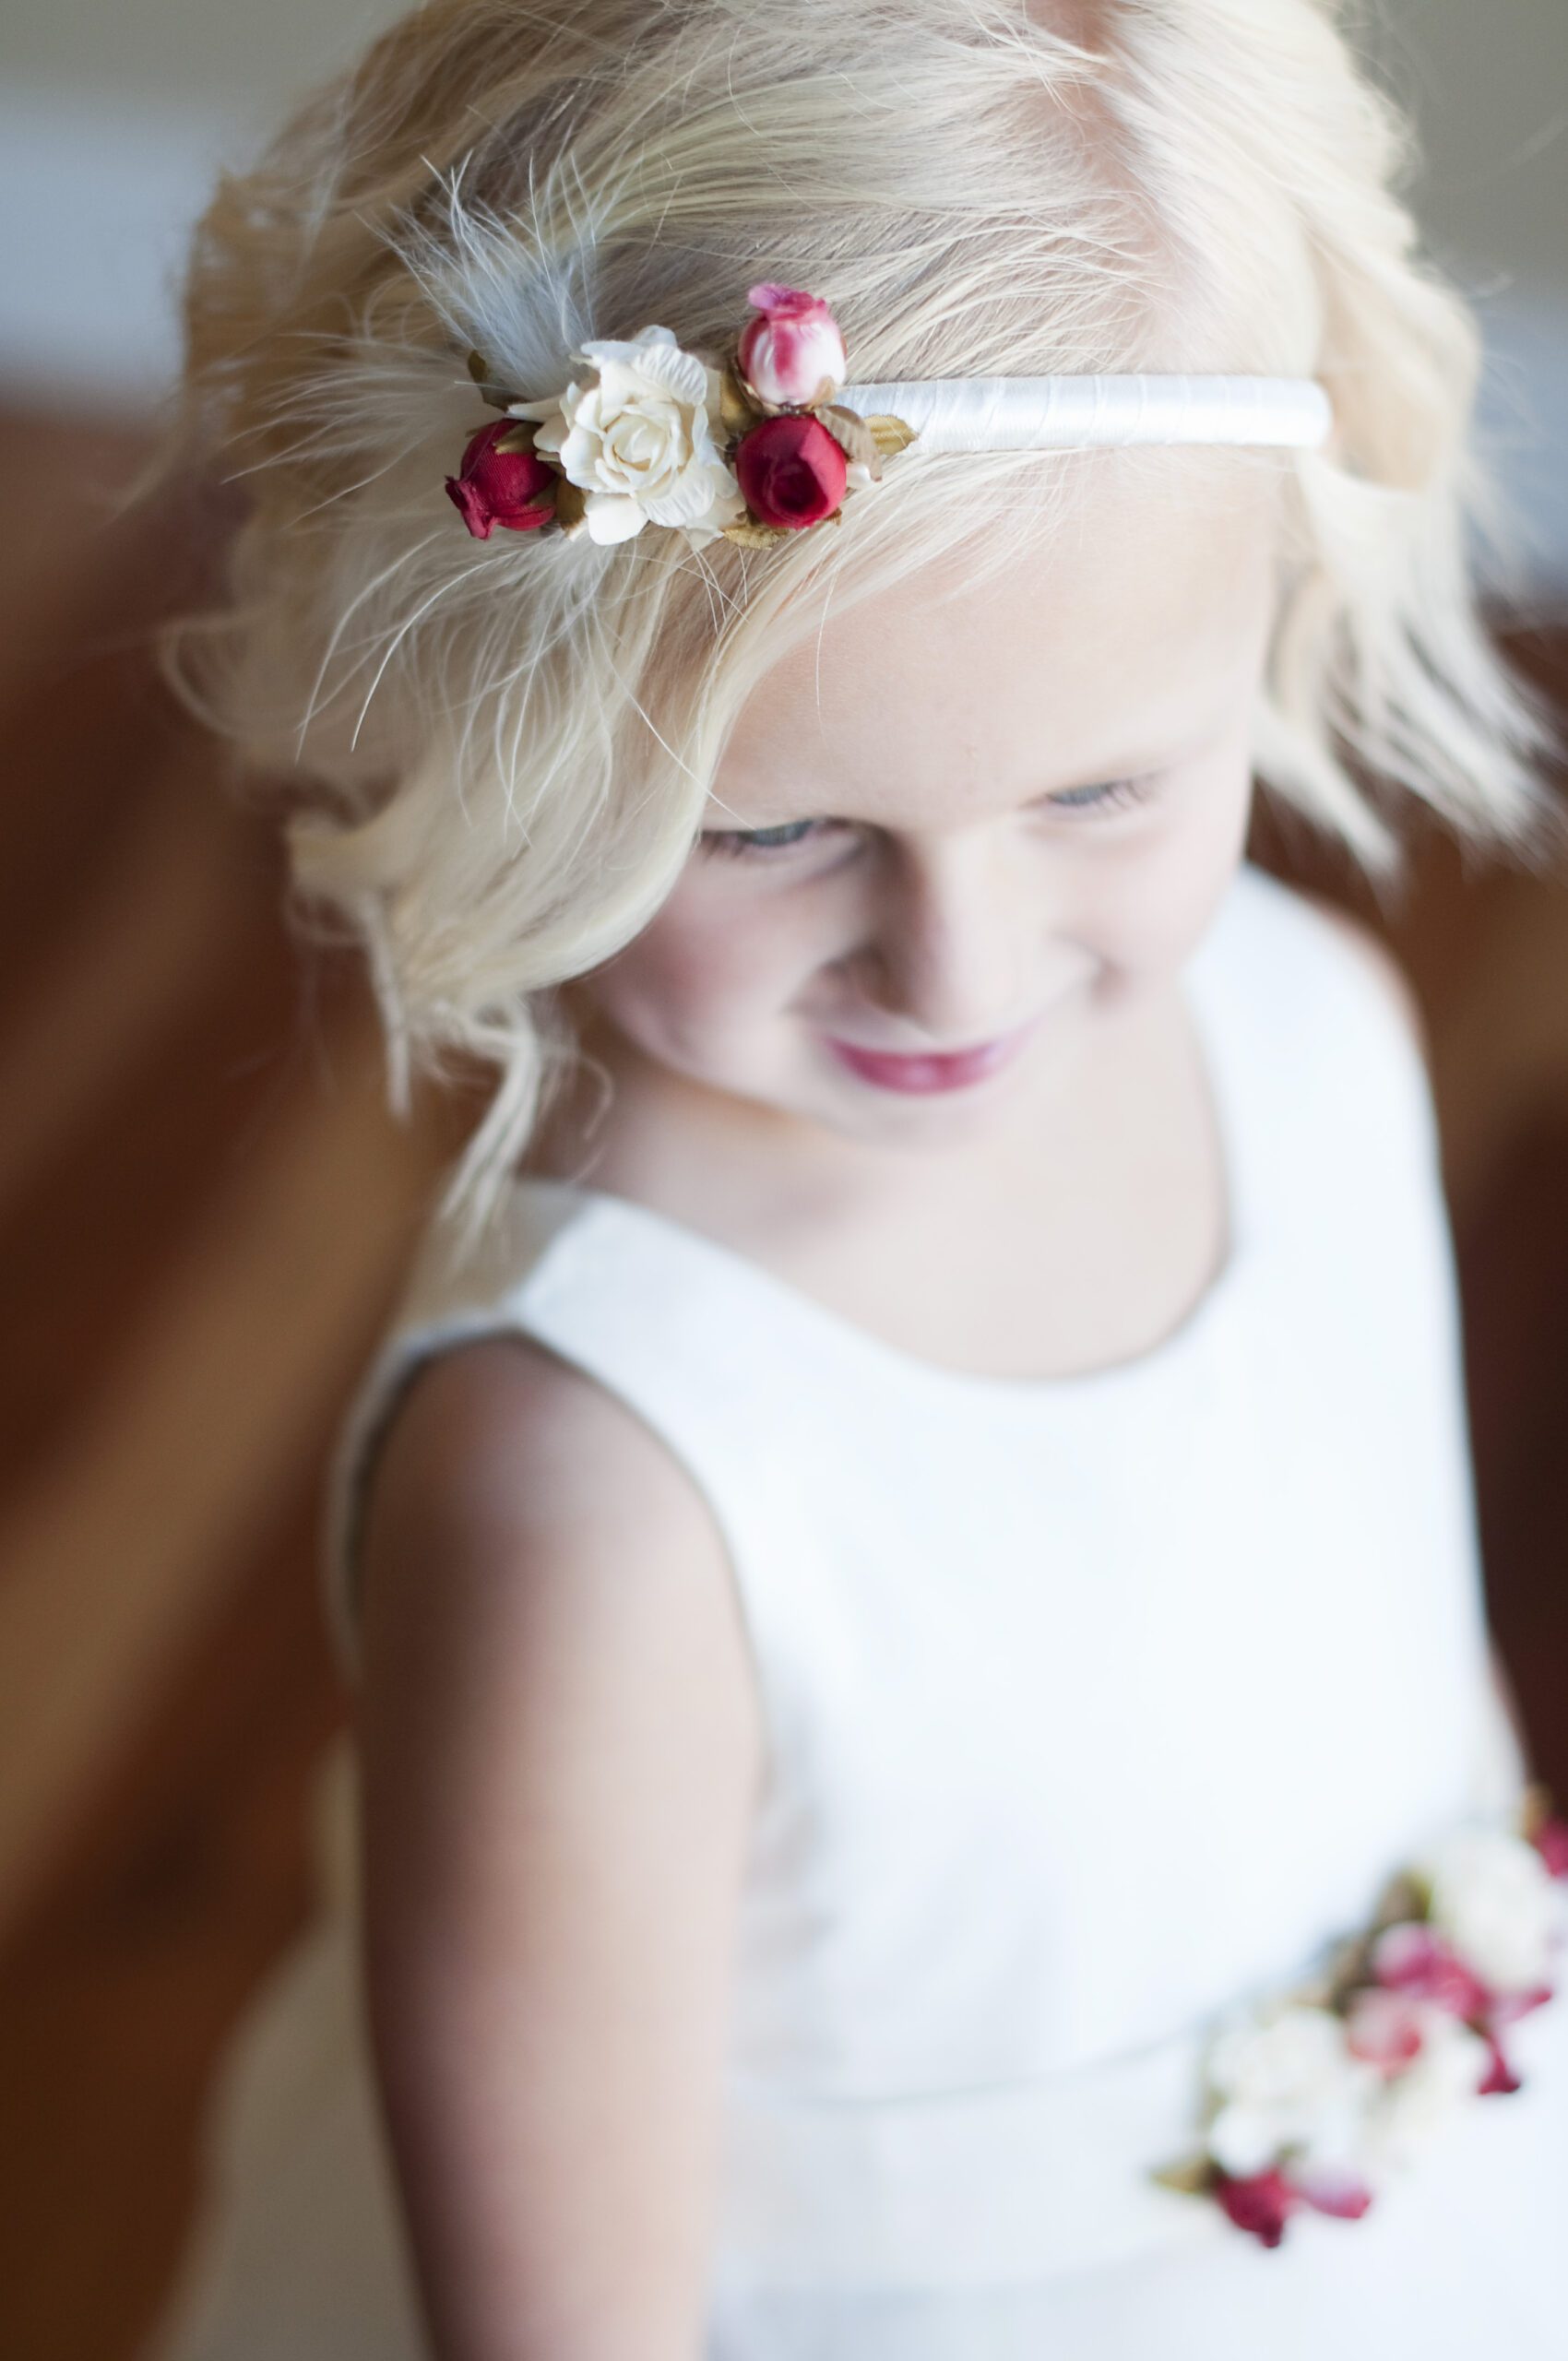 A photo of a flower girl headband in white or ivory satin with pretty red roses